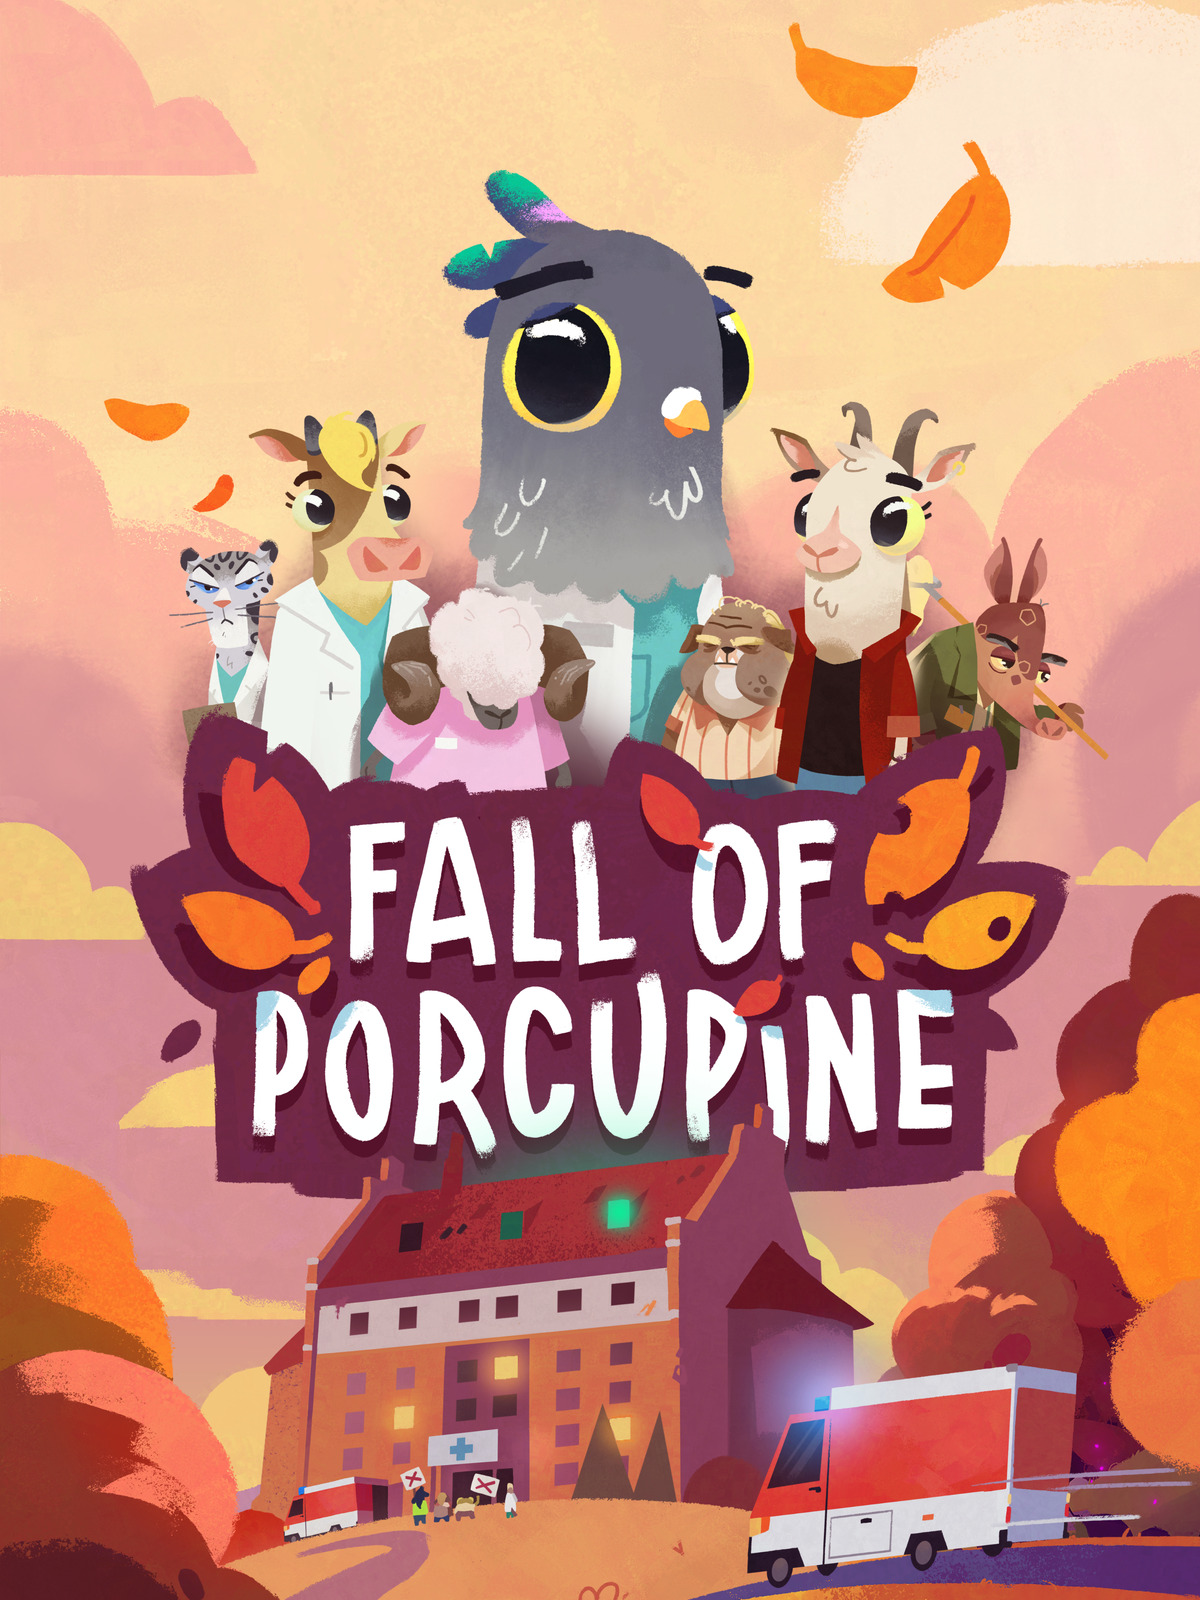 Fall of Porcupine